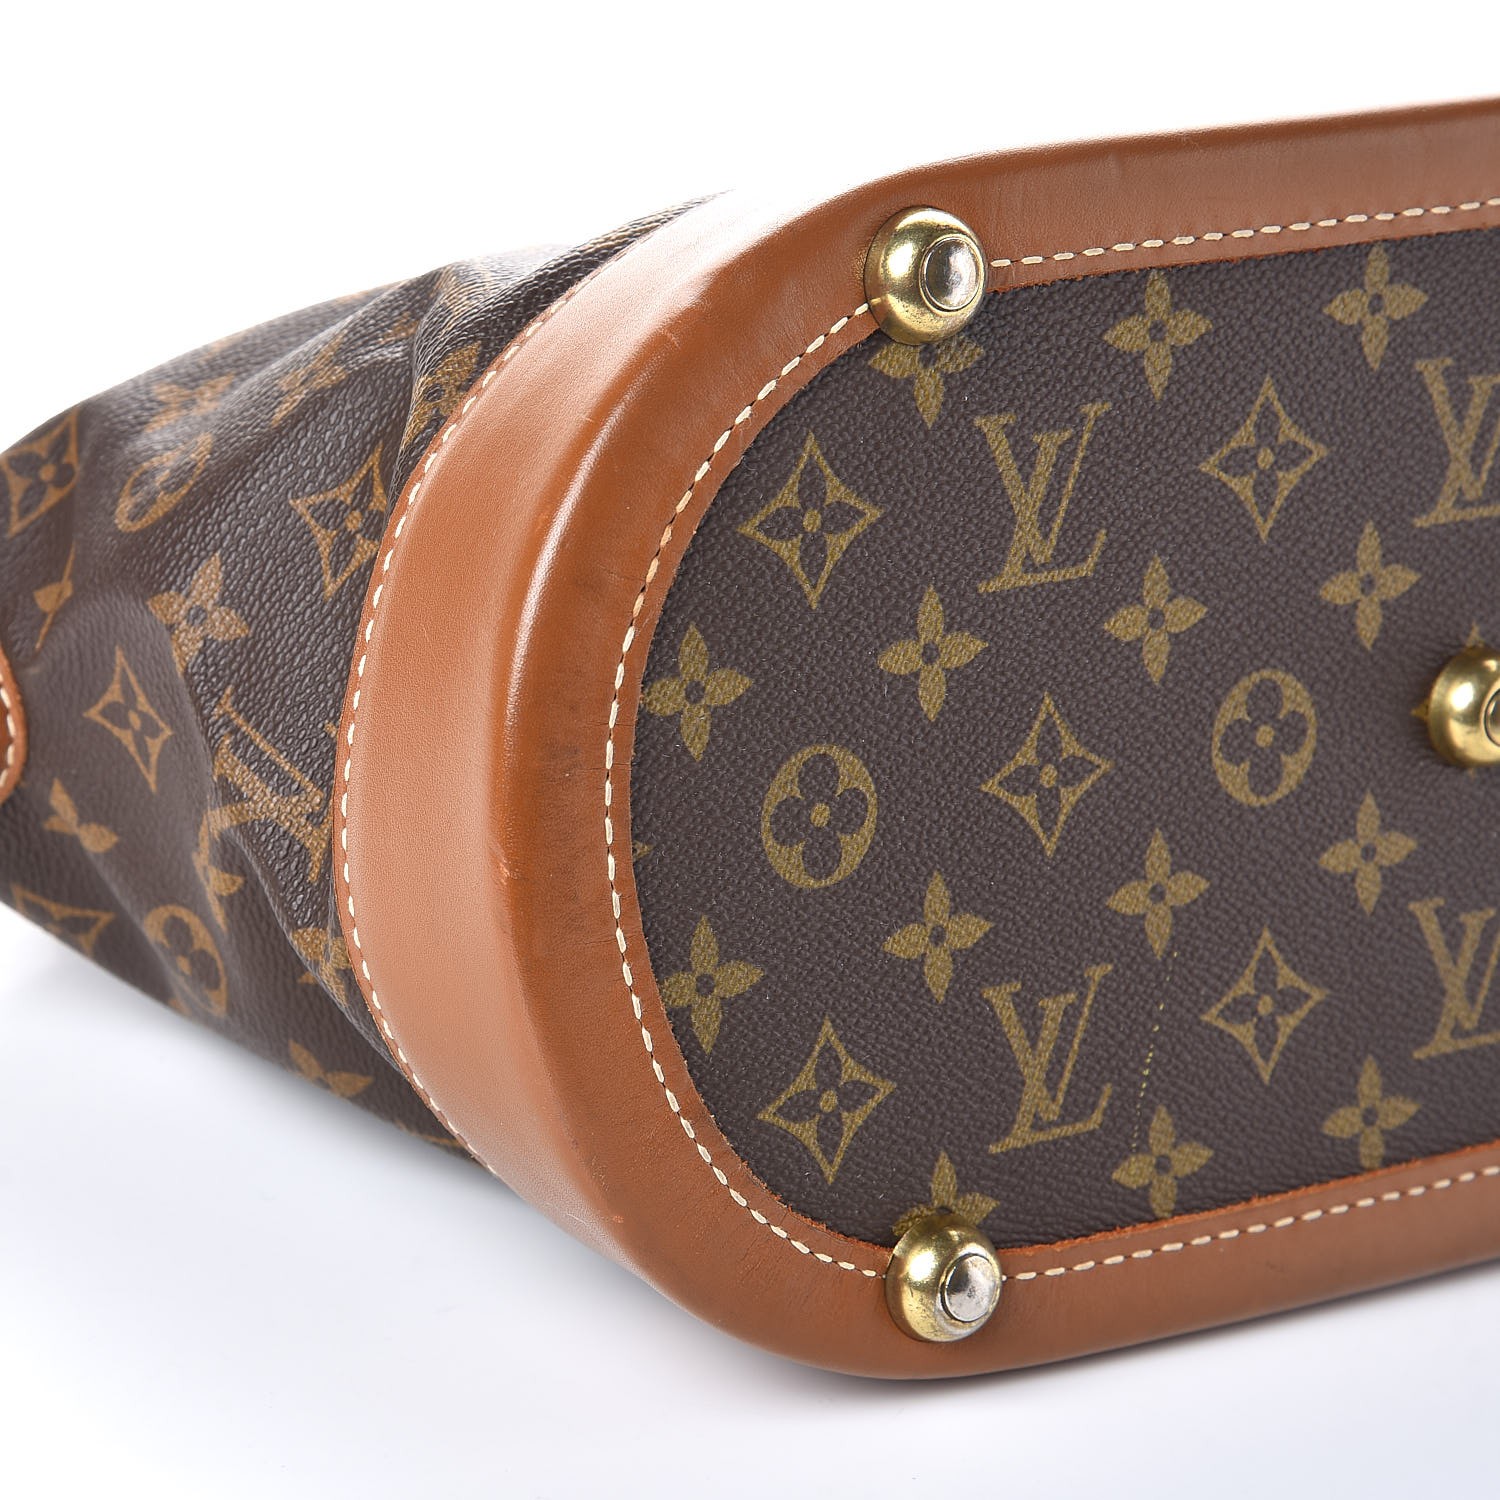 LOUIS VUITTON French Company Sac Chien Dog Pet Carrier 293466